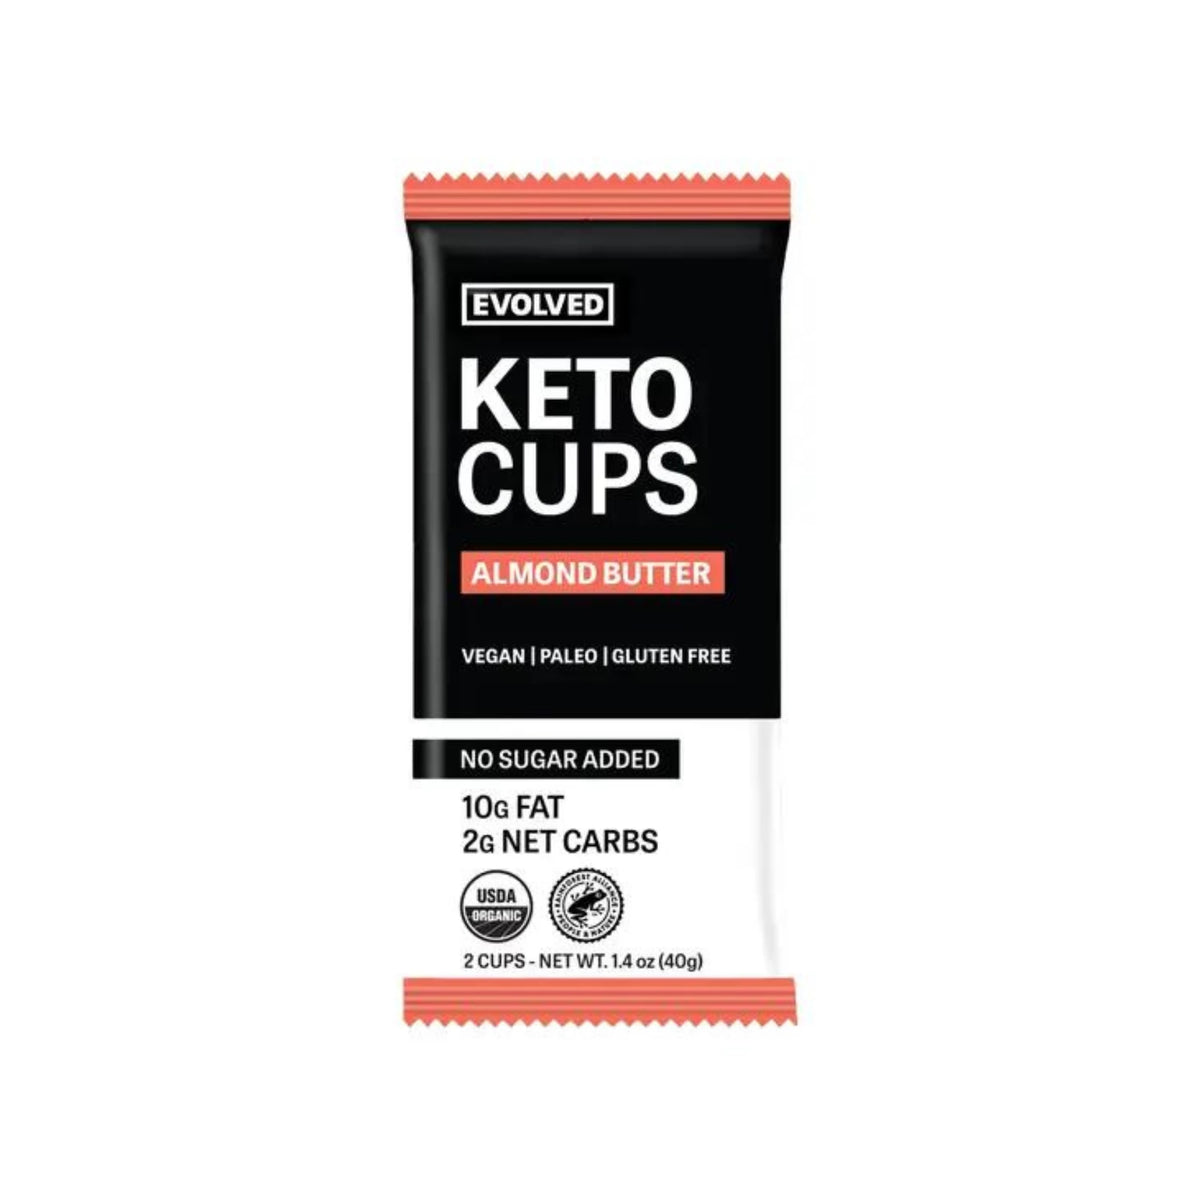 Evolved Keto Cups Almond Butter